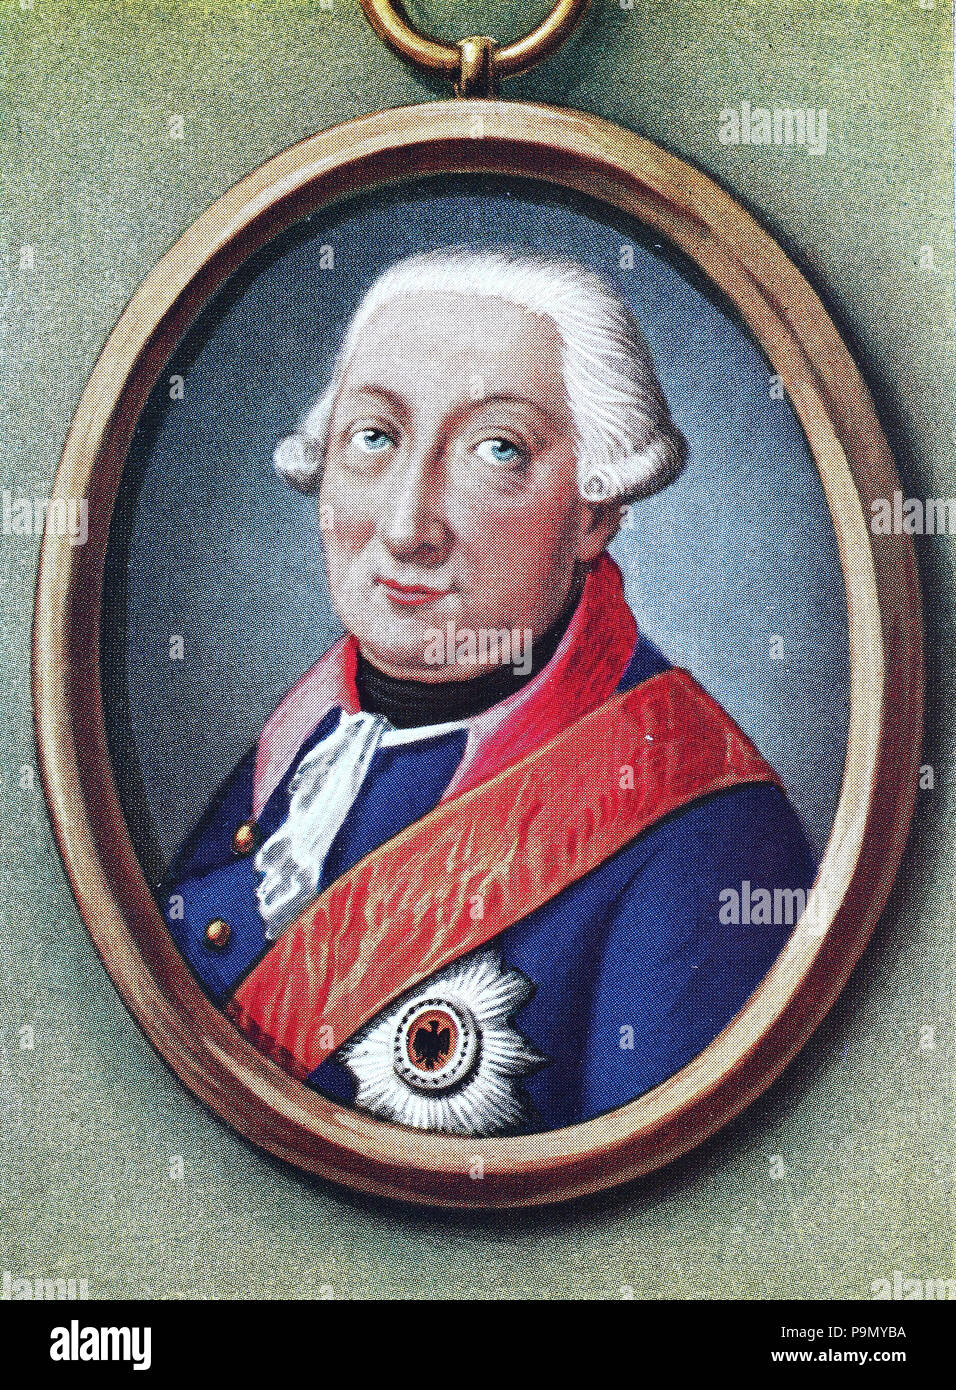 Bogislav Friedrich Emanuel Graf Tauentzien von Wittenberg, 15 September 1760 â€“ 20 February 1824, was a Prussian general of the Napoleonic Wars, digital improved reproduction of an original print from the year 1900 Stock Photo